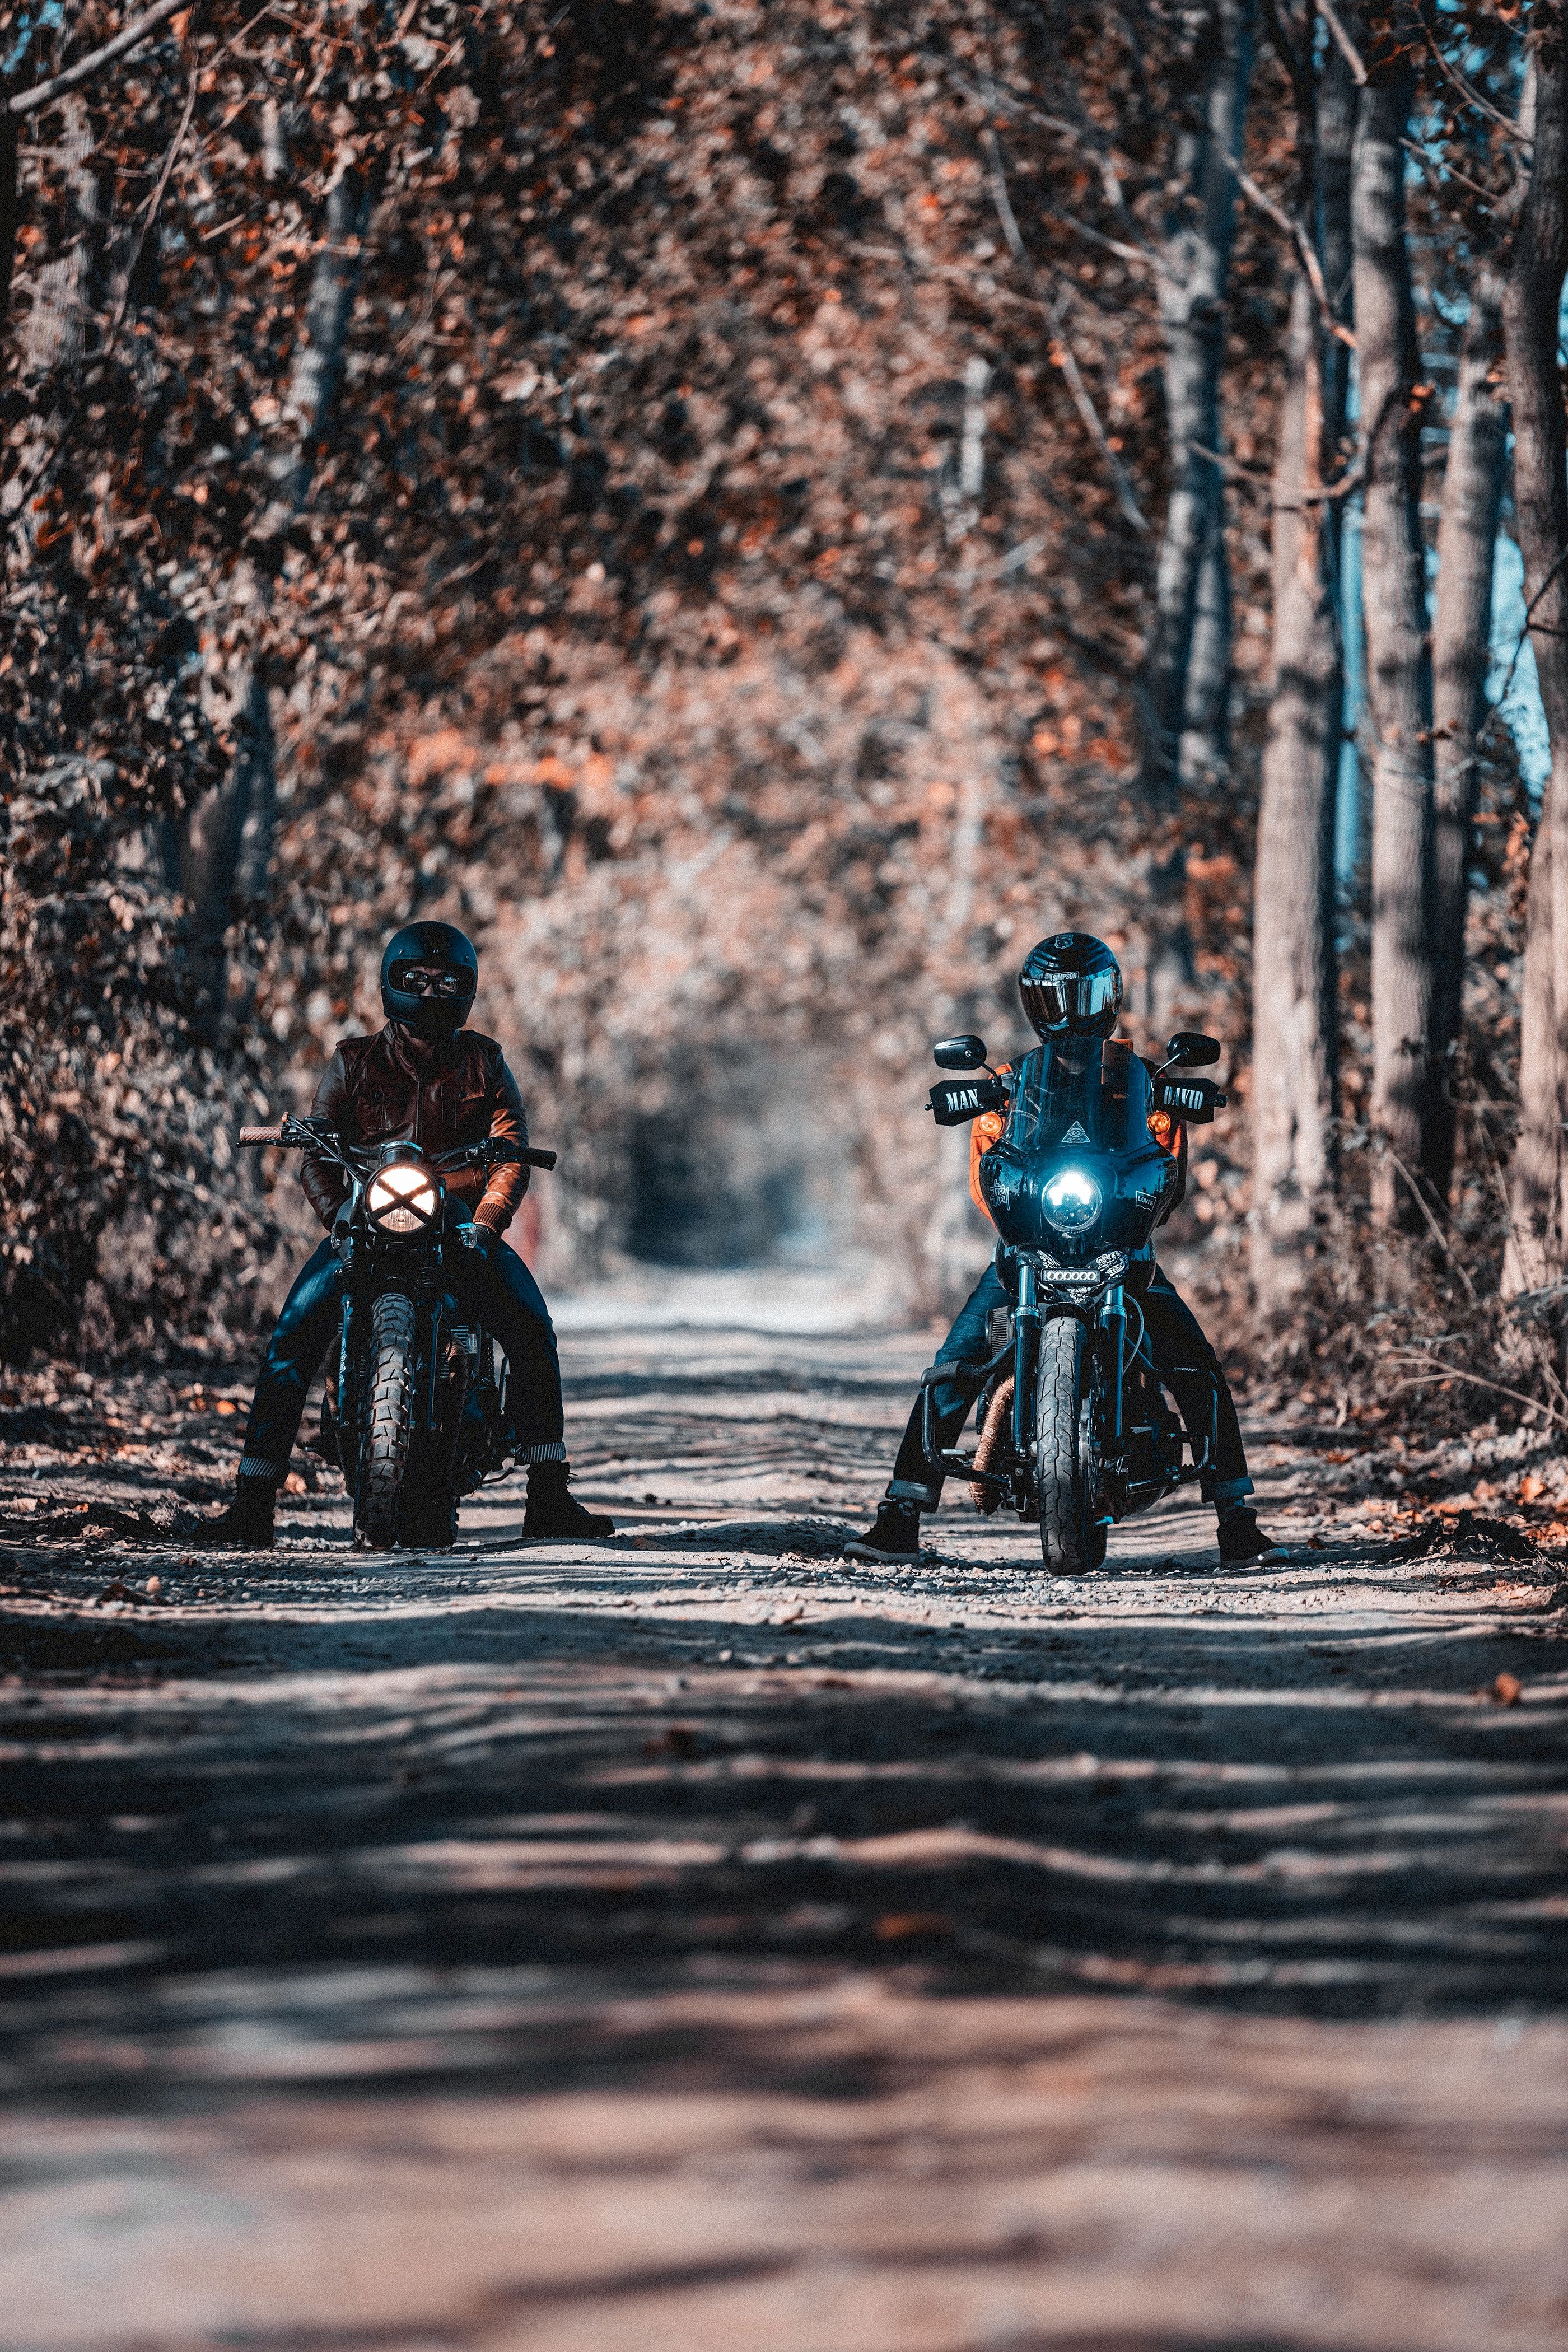 bike, motorcycles, road, forest, motorcycle, motorcyclists, bikers